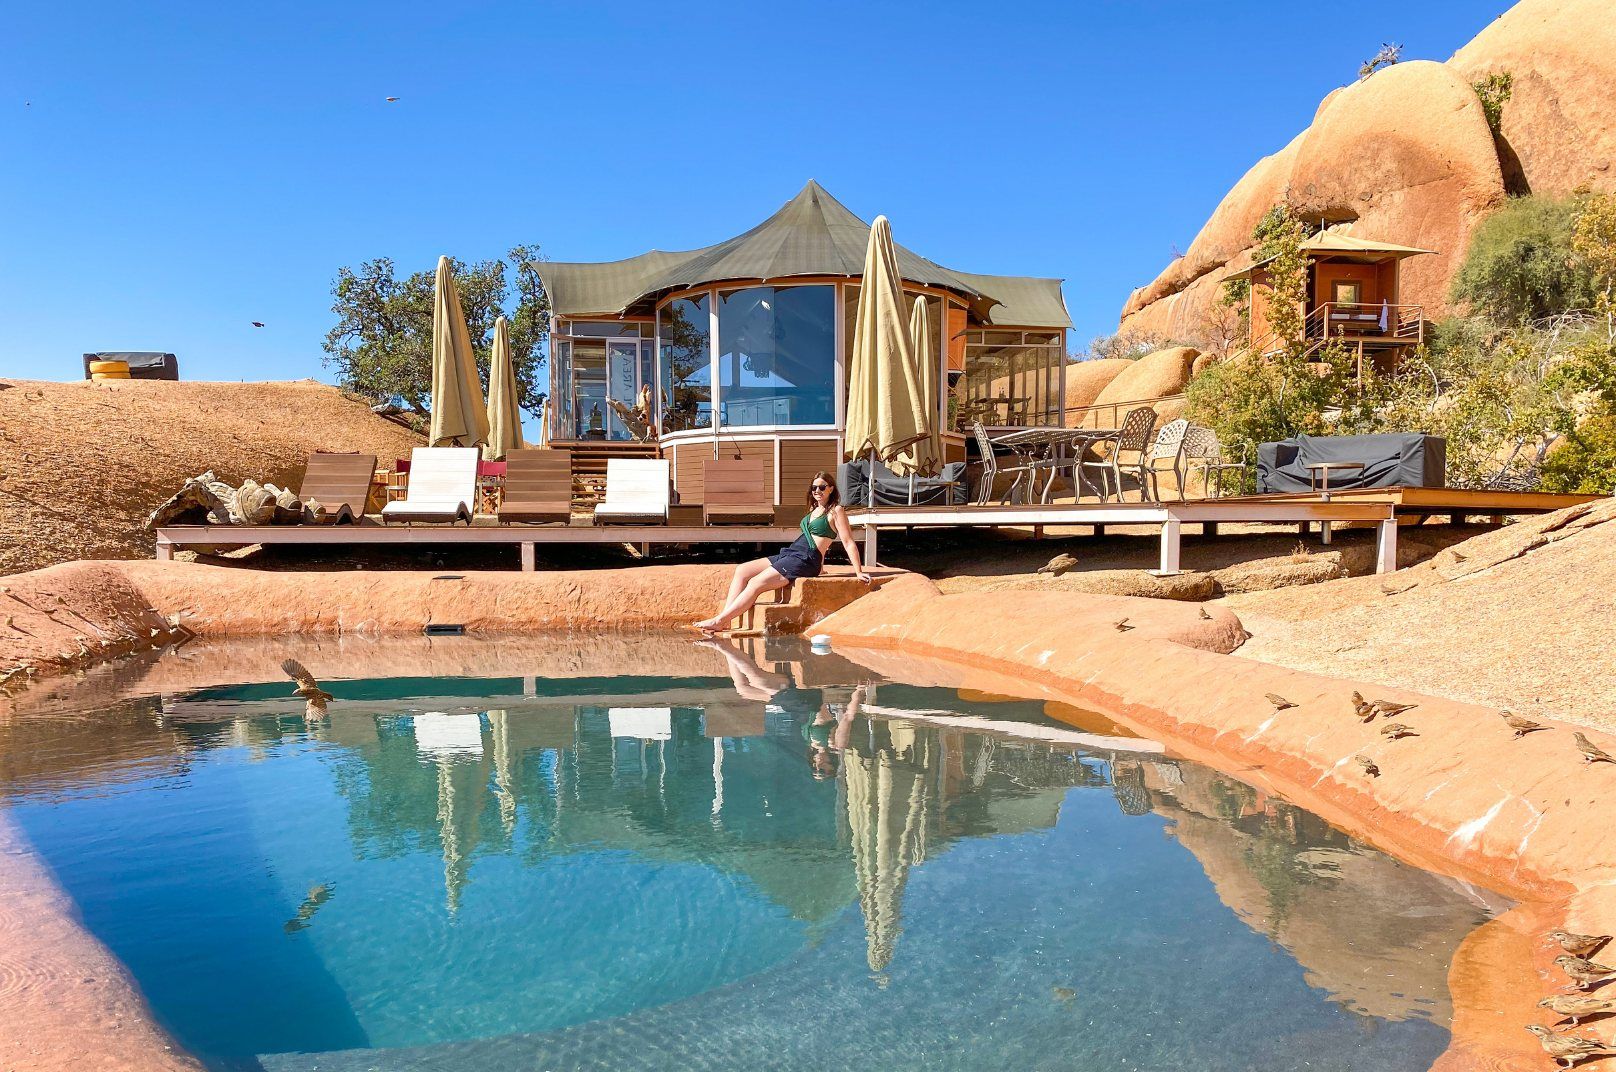 my stay at Spitzkoppen Lodge in Namibia